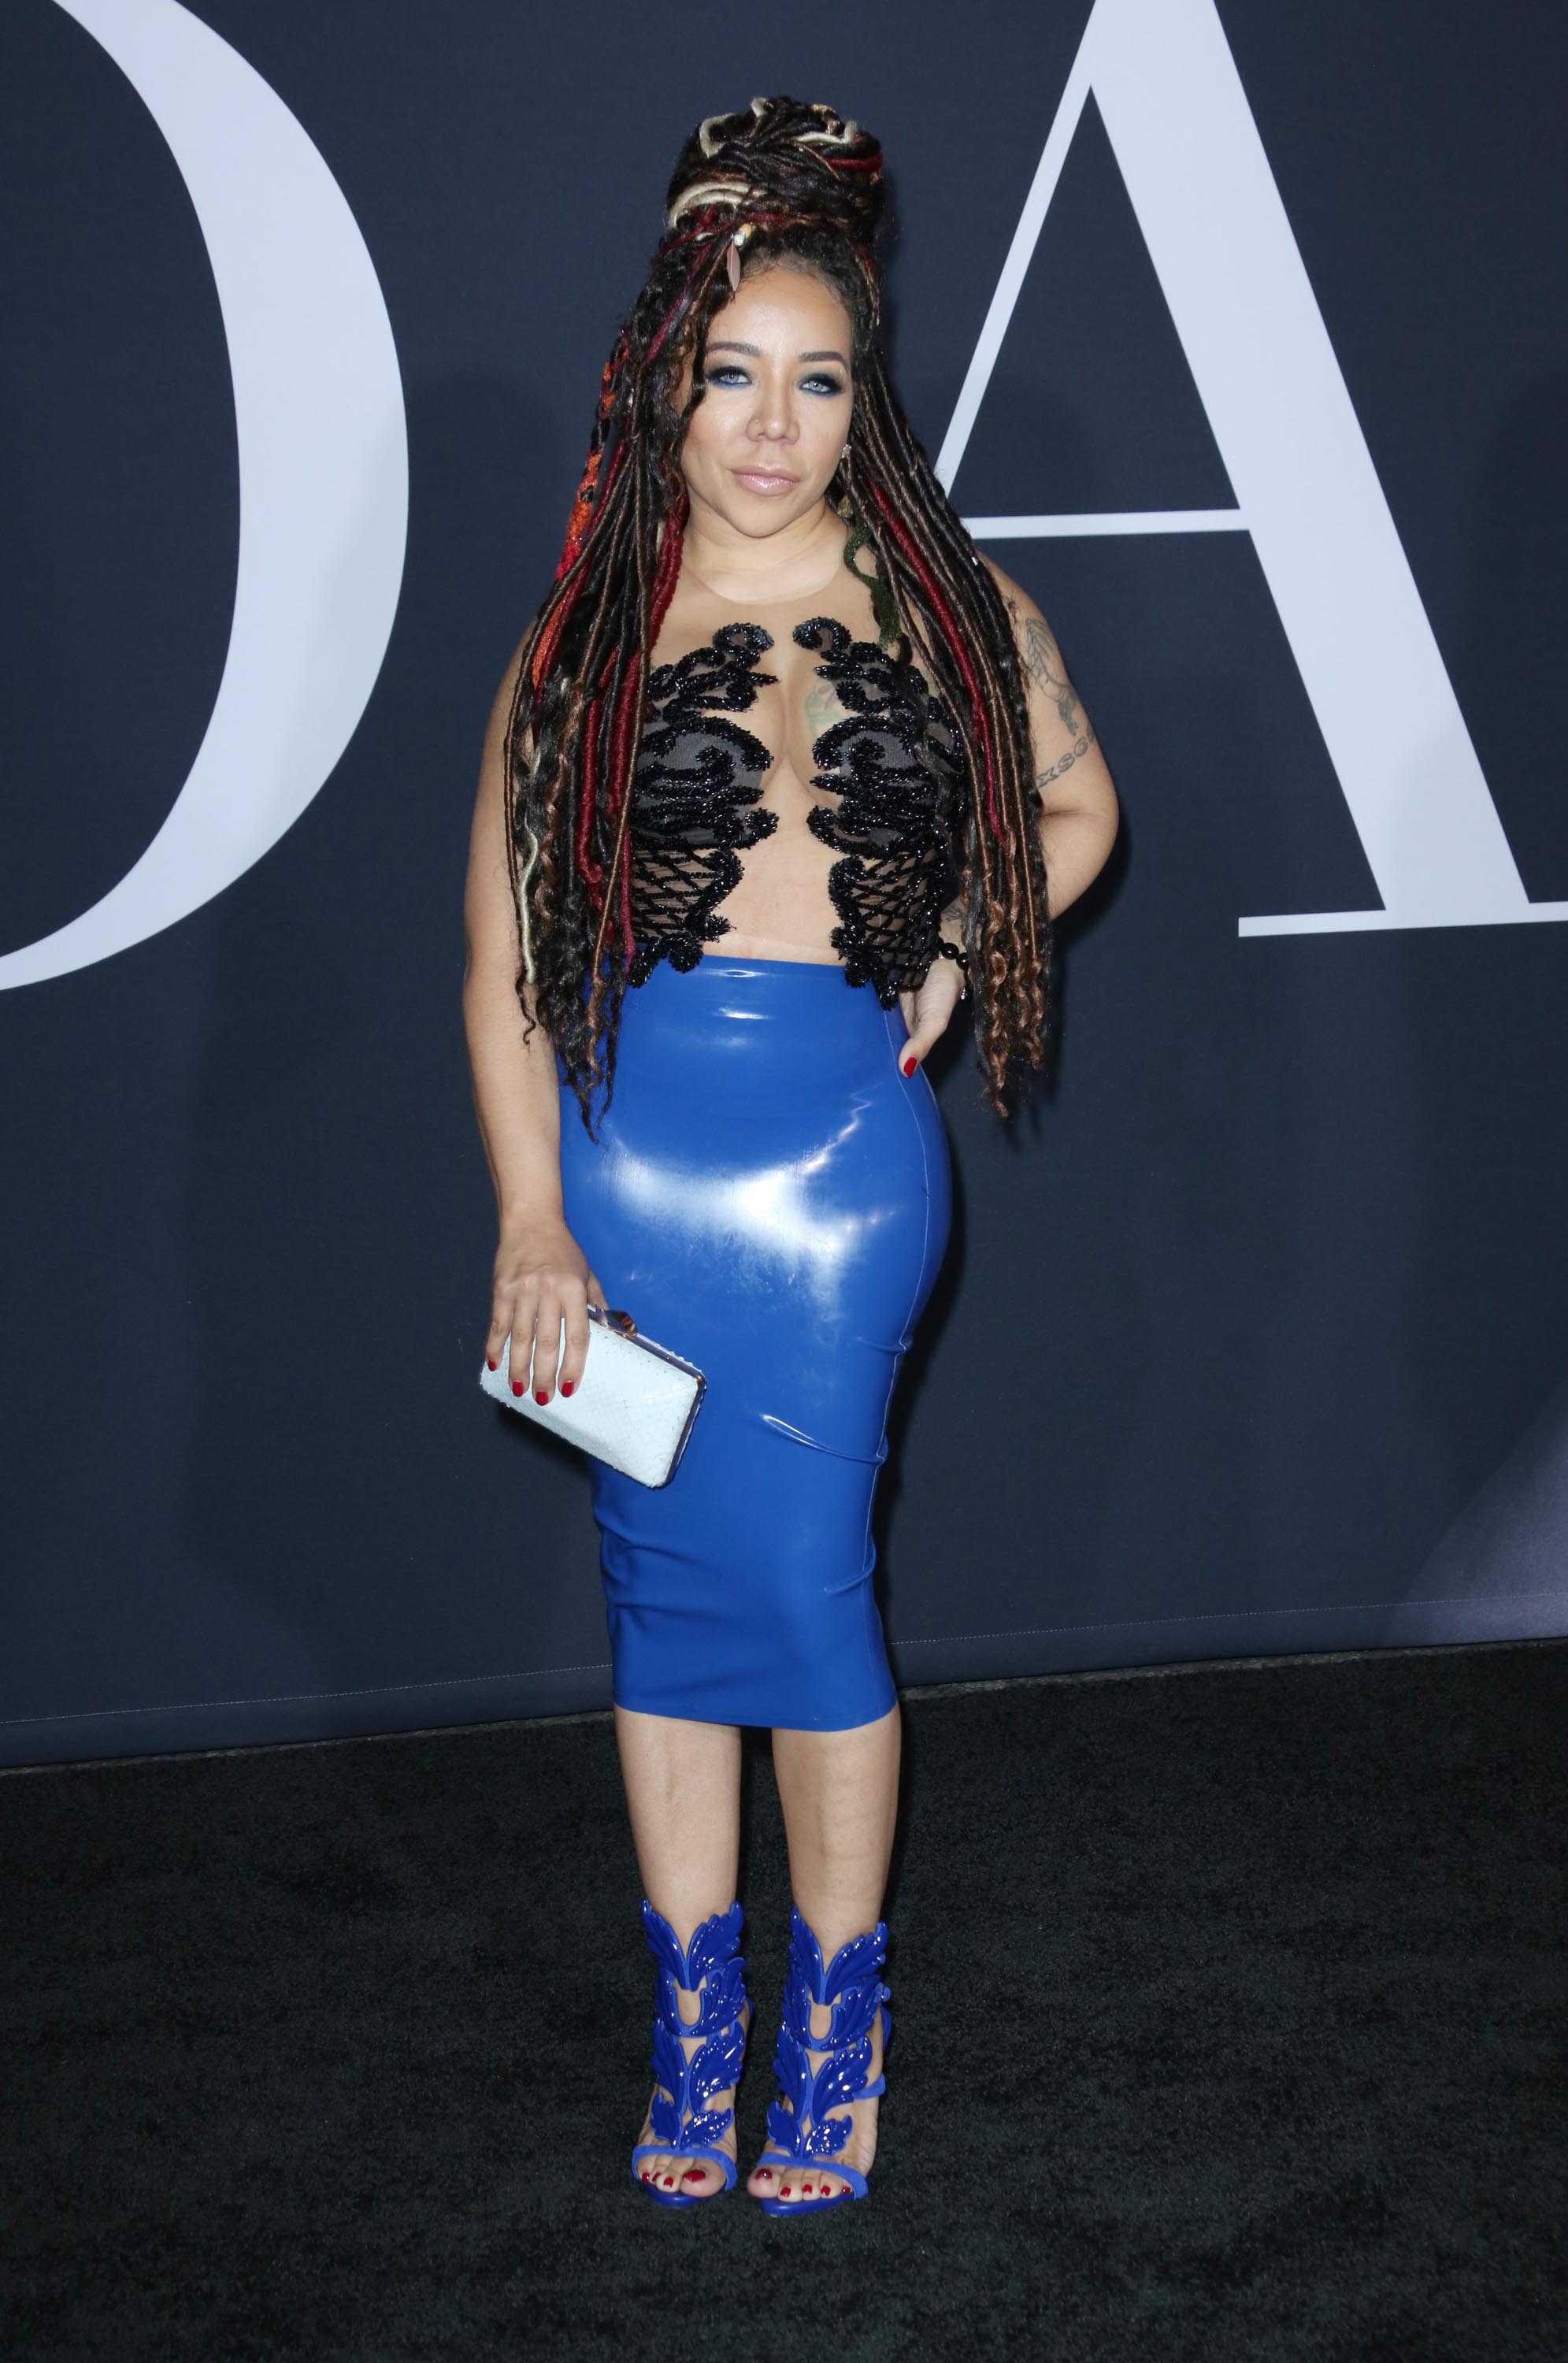 Tameka Cottle arrives at the premiere of Universal Pictures’ ‘Fifty Shades Darker’